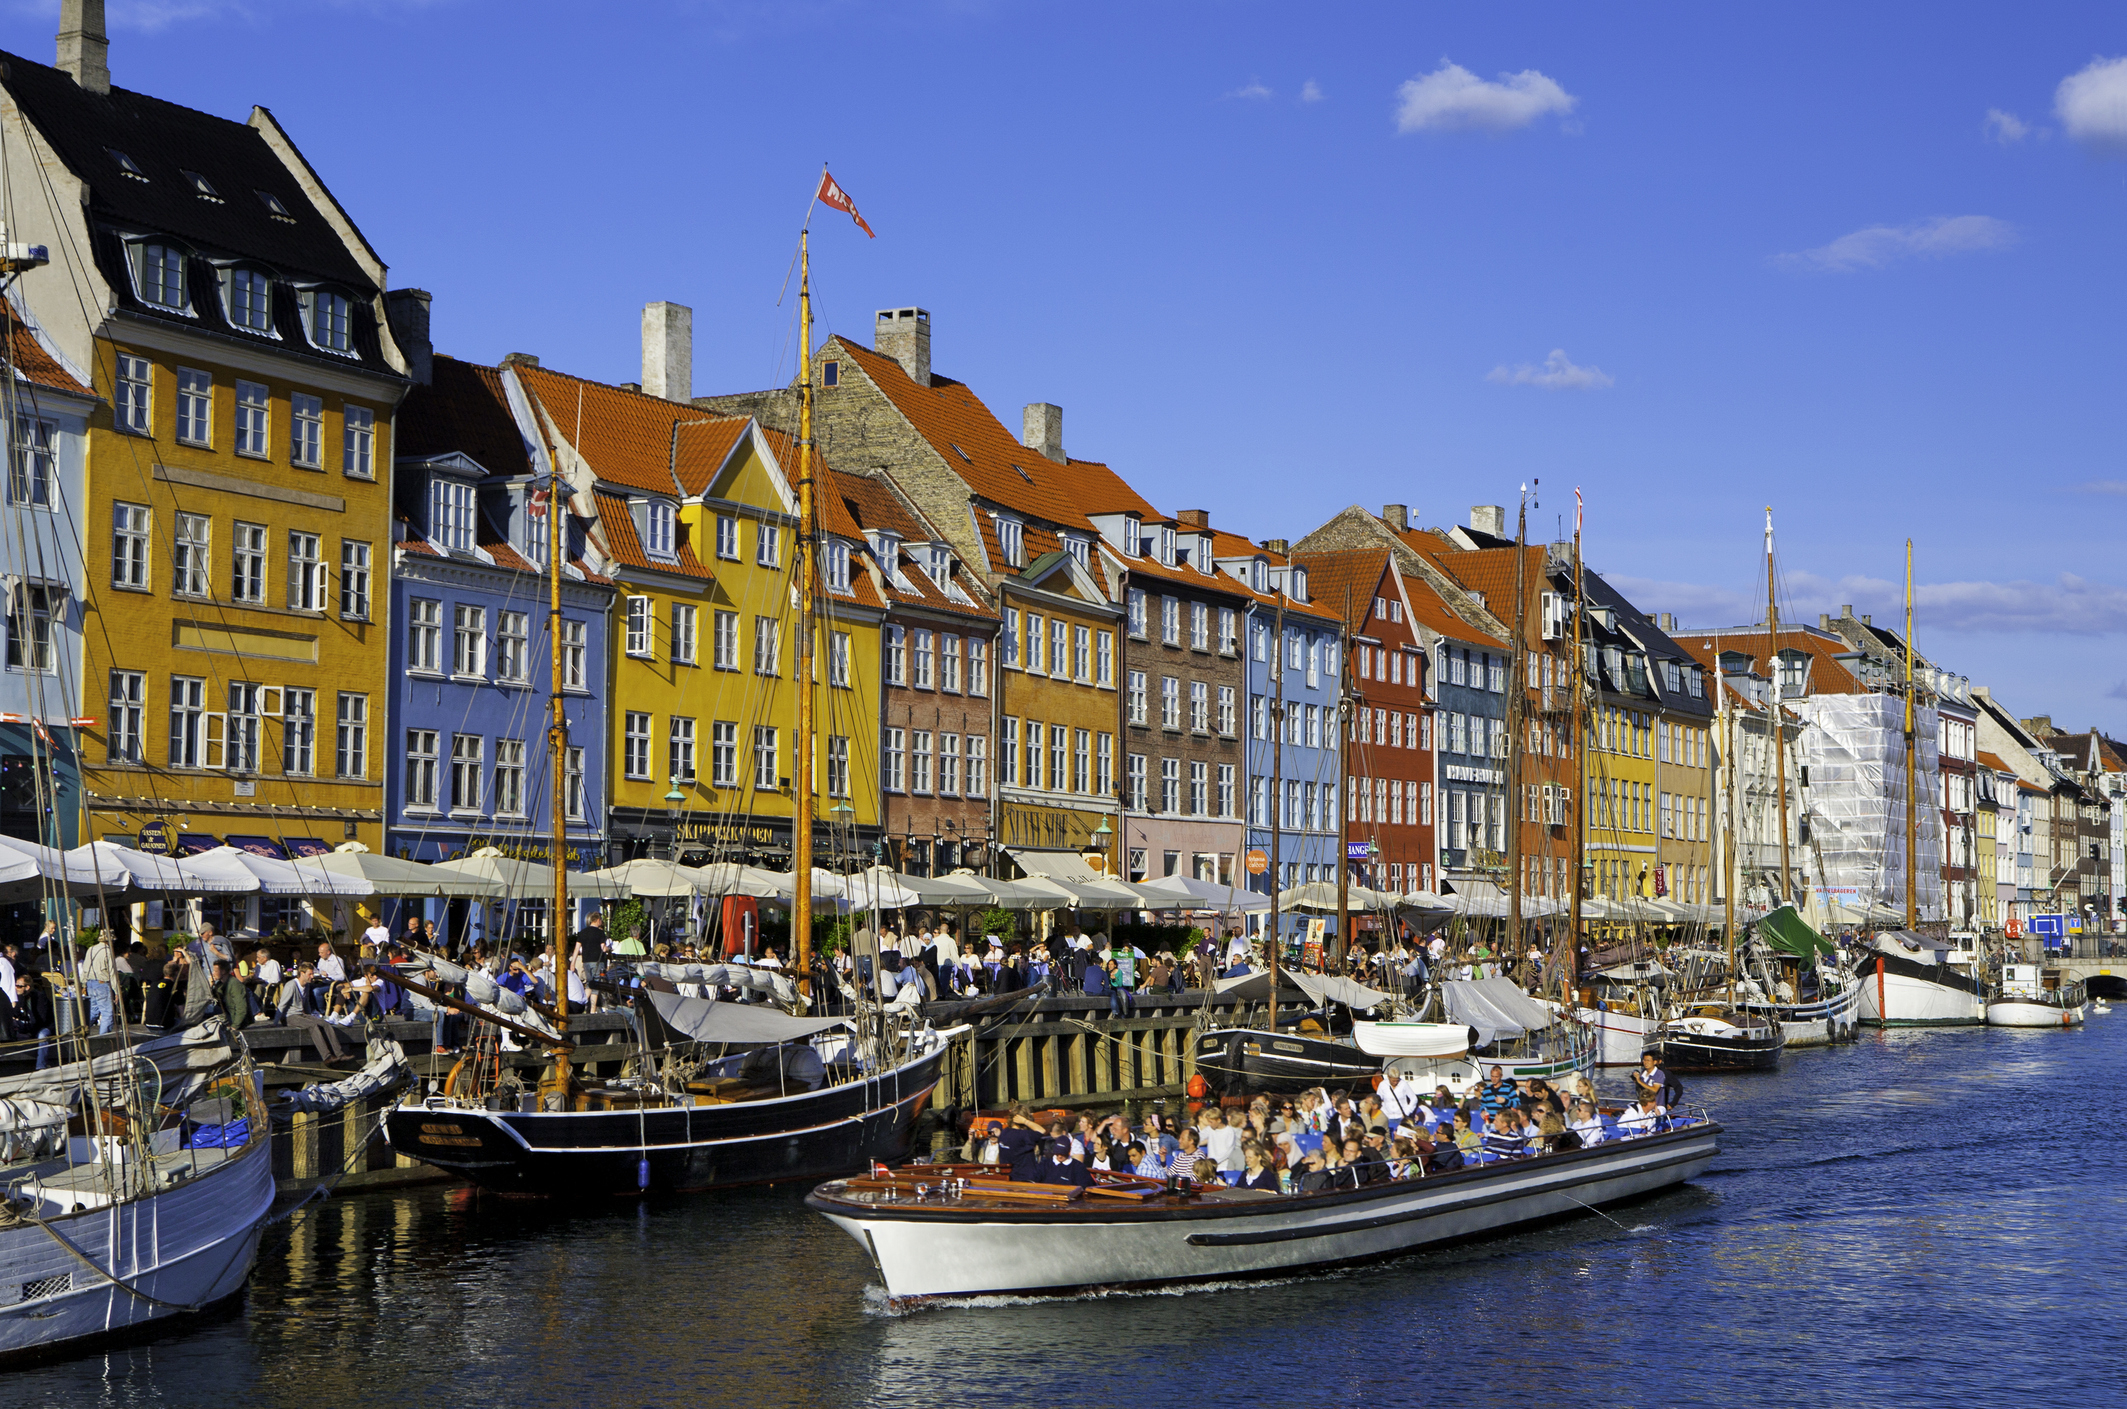 Scenic view of Nyhavn canal with boats and lined with buildings, people dining by the waterfront